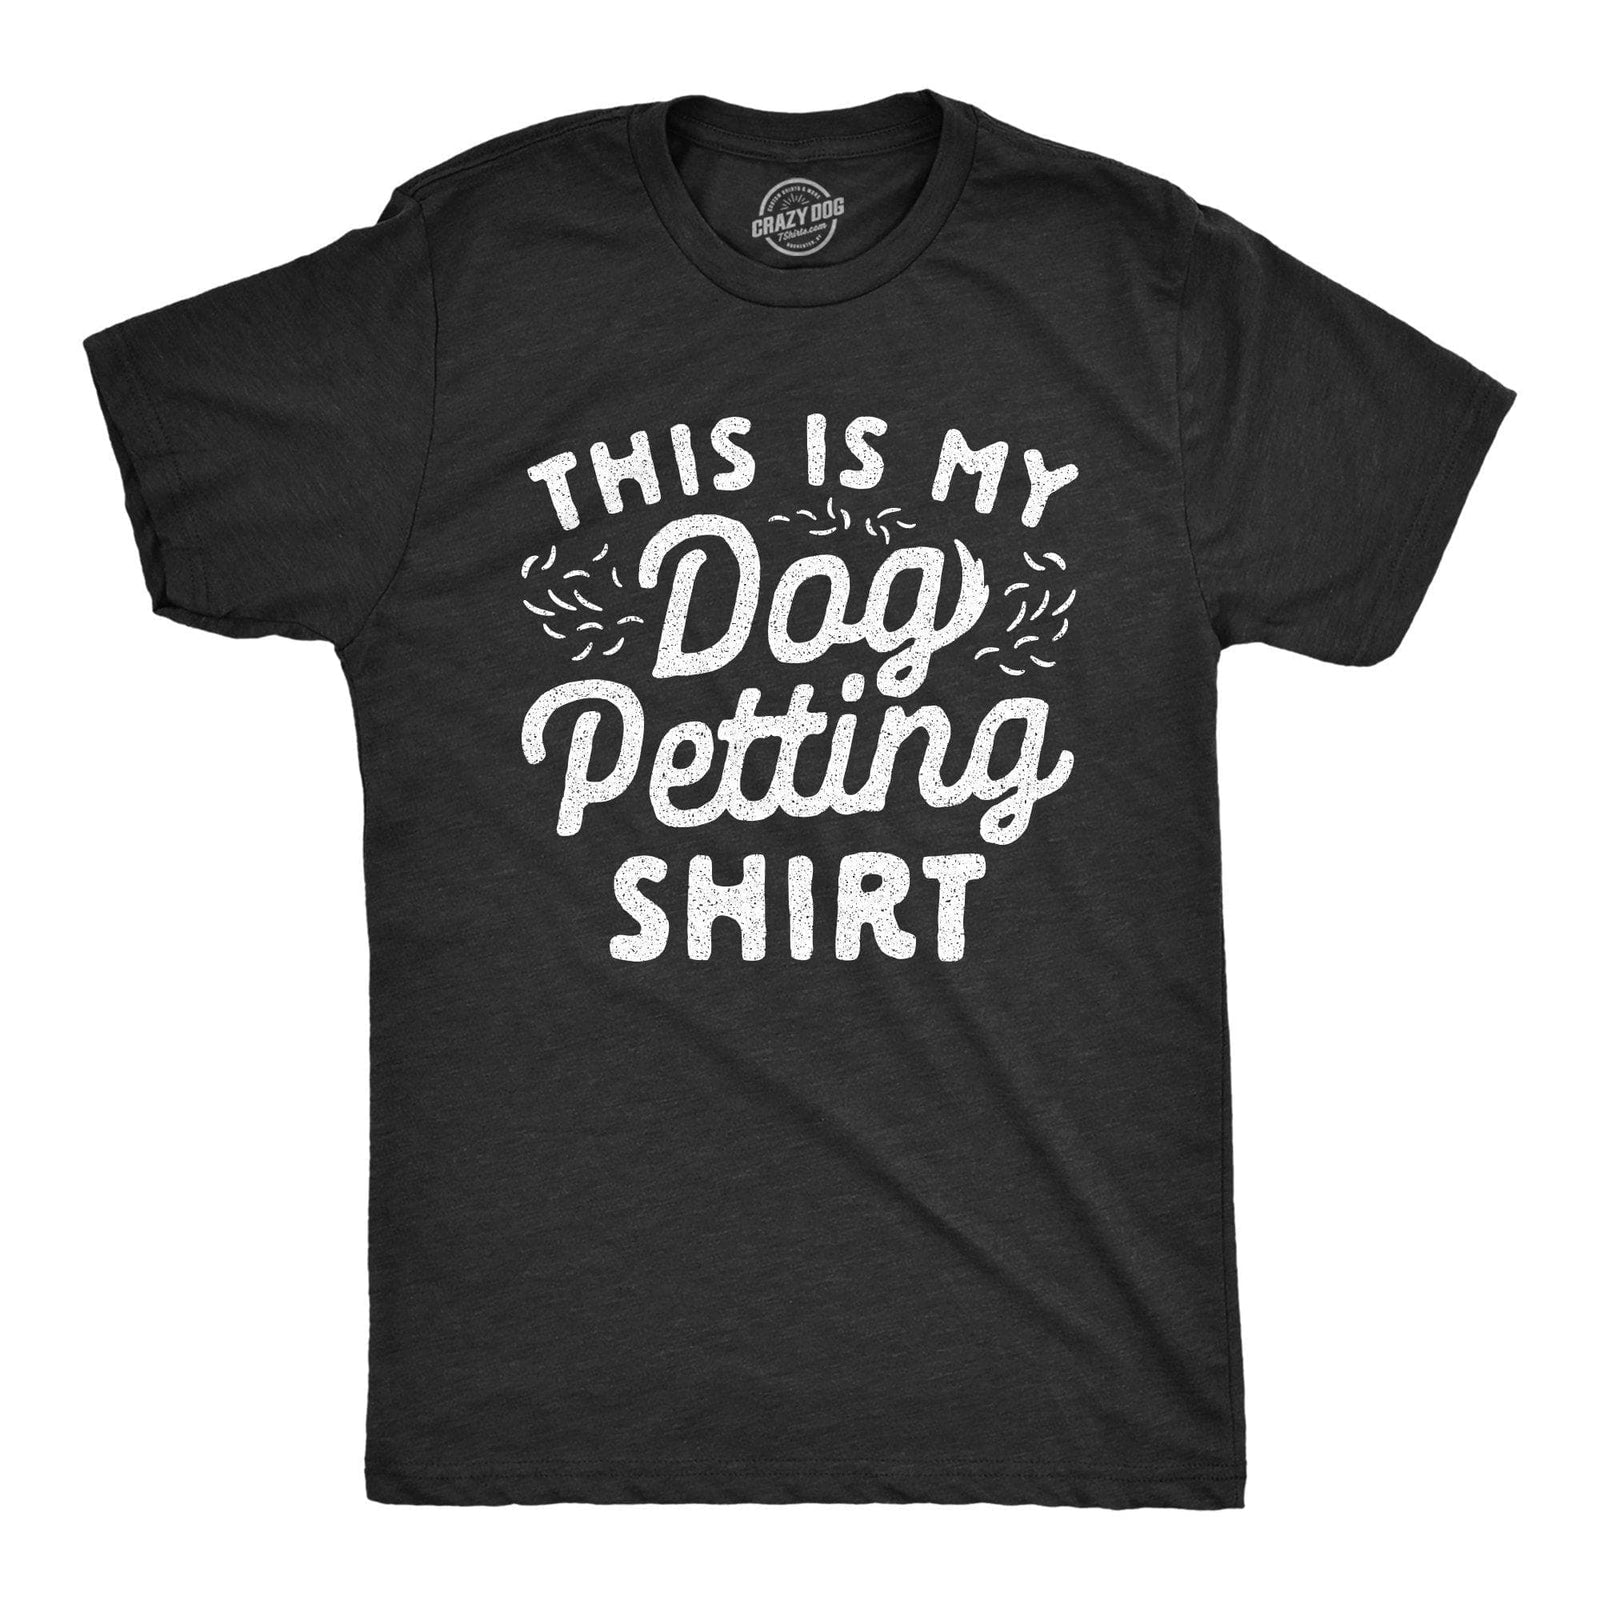 Mens My Dog Is Cool As Fuck Tshirt Funny Pet Puppy Animal Lover Gift Tee